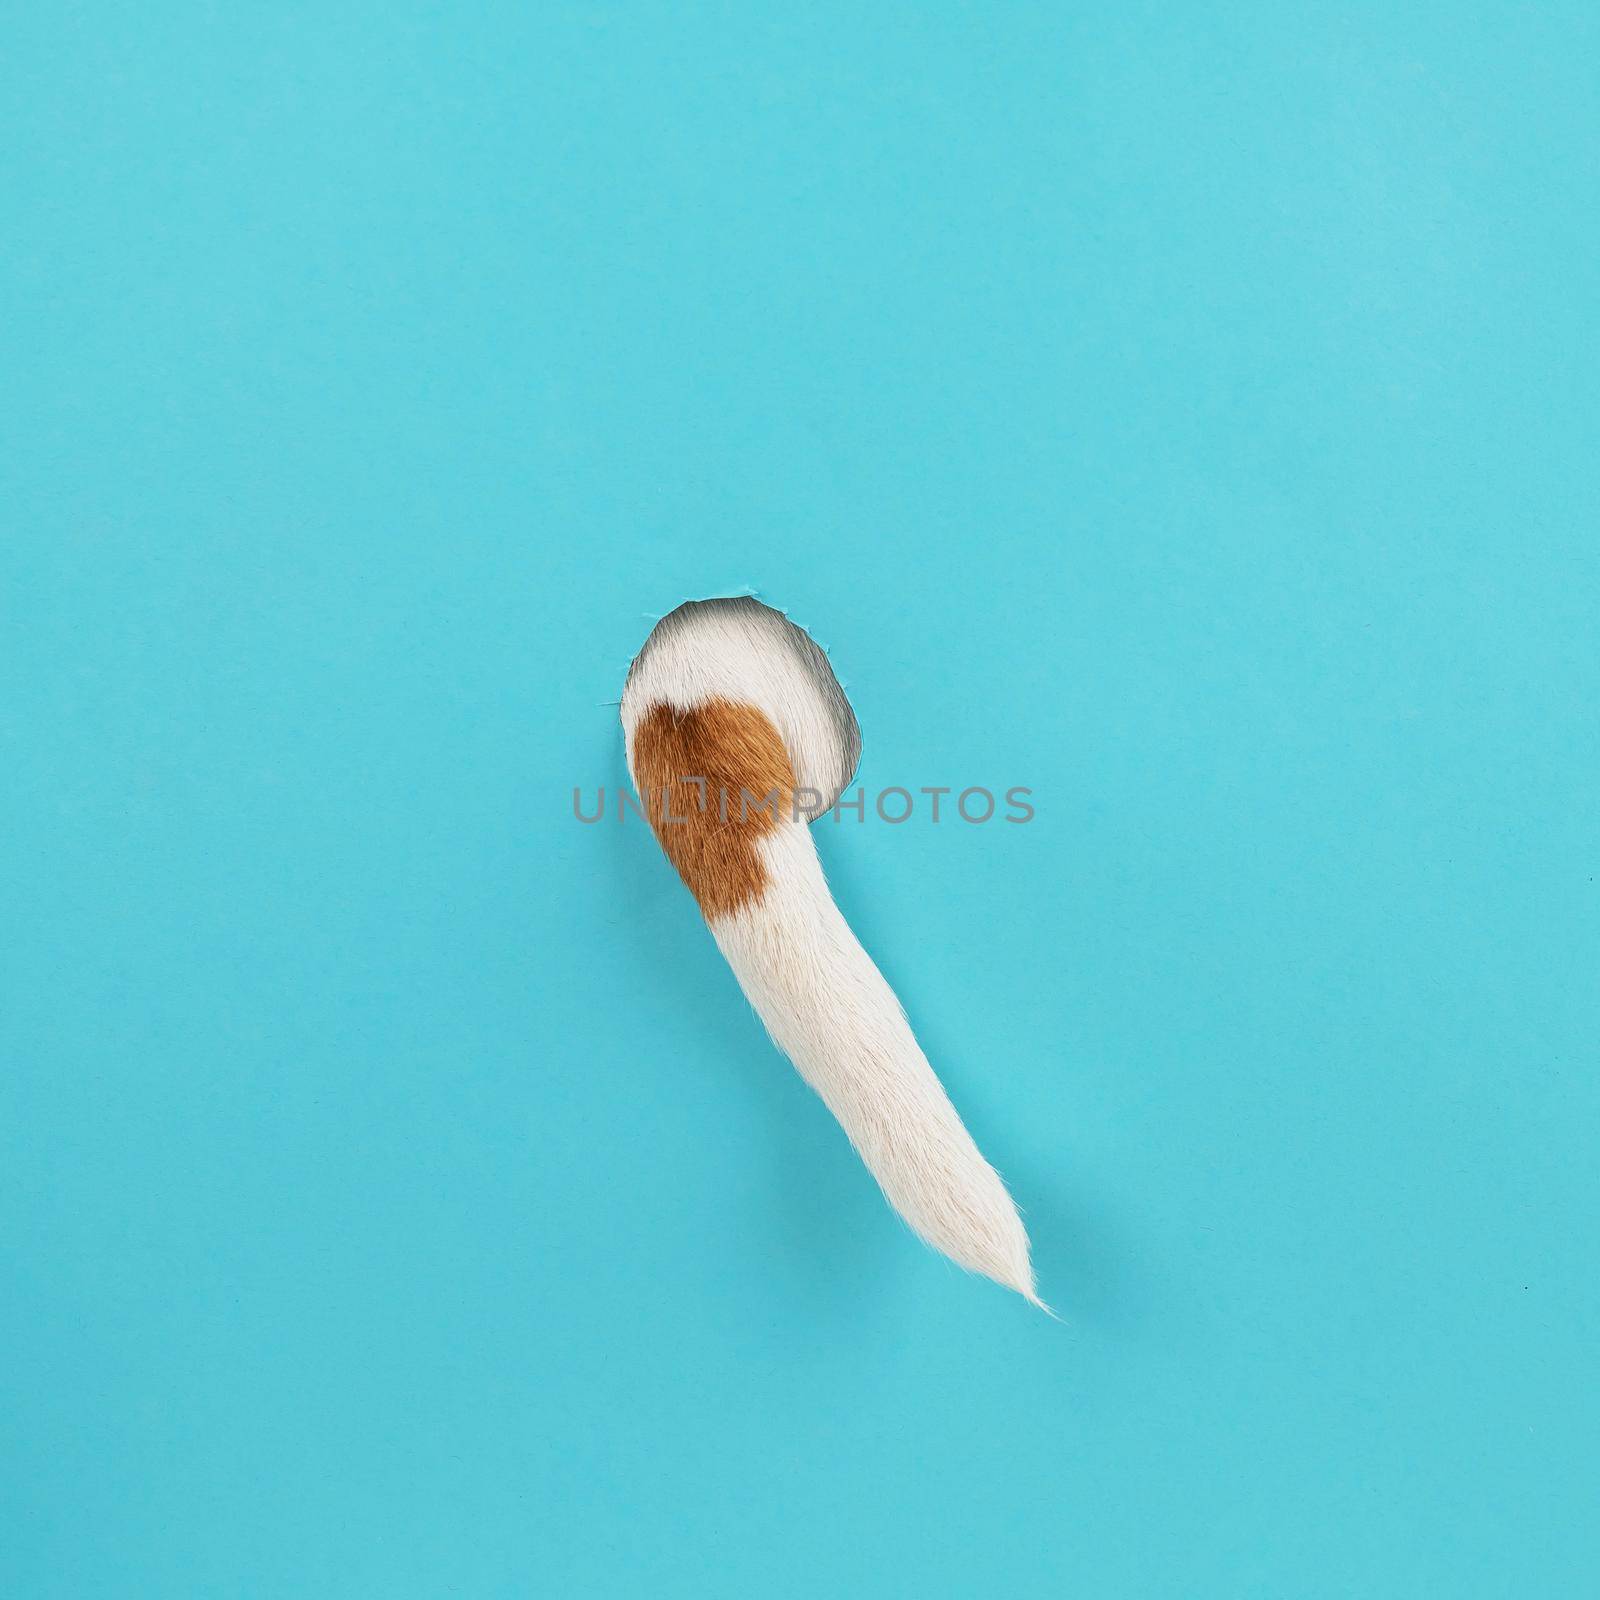 Dog tail sticking out of a hole in paper blue background